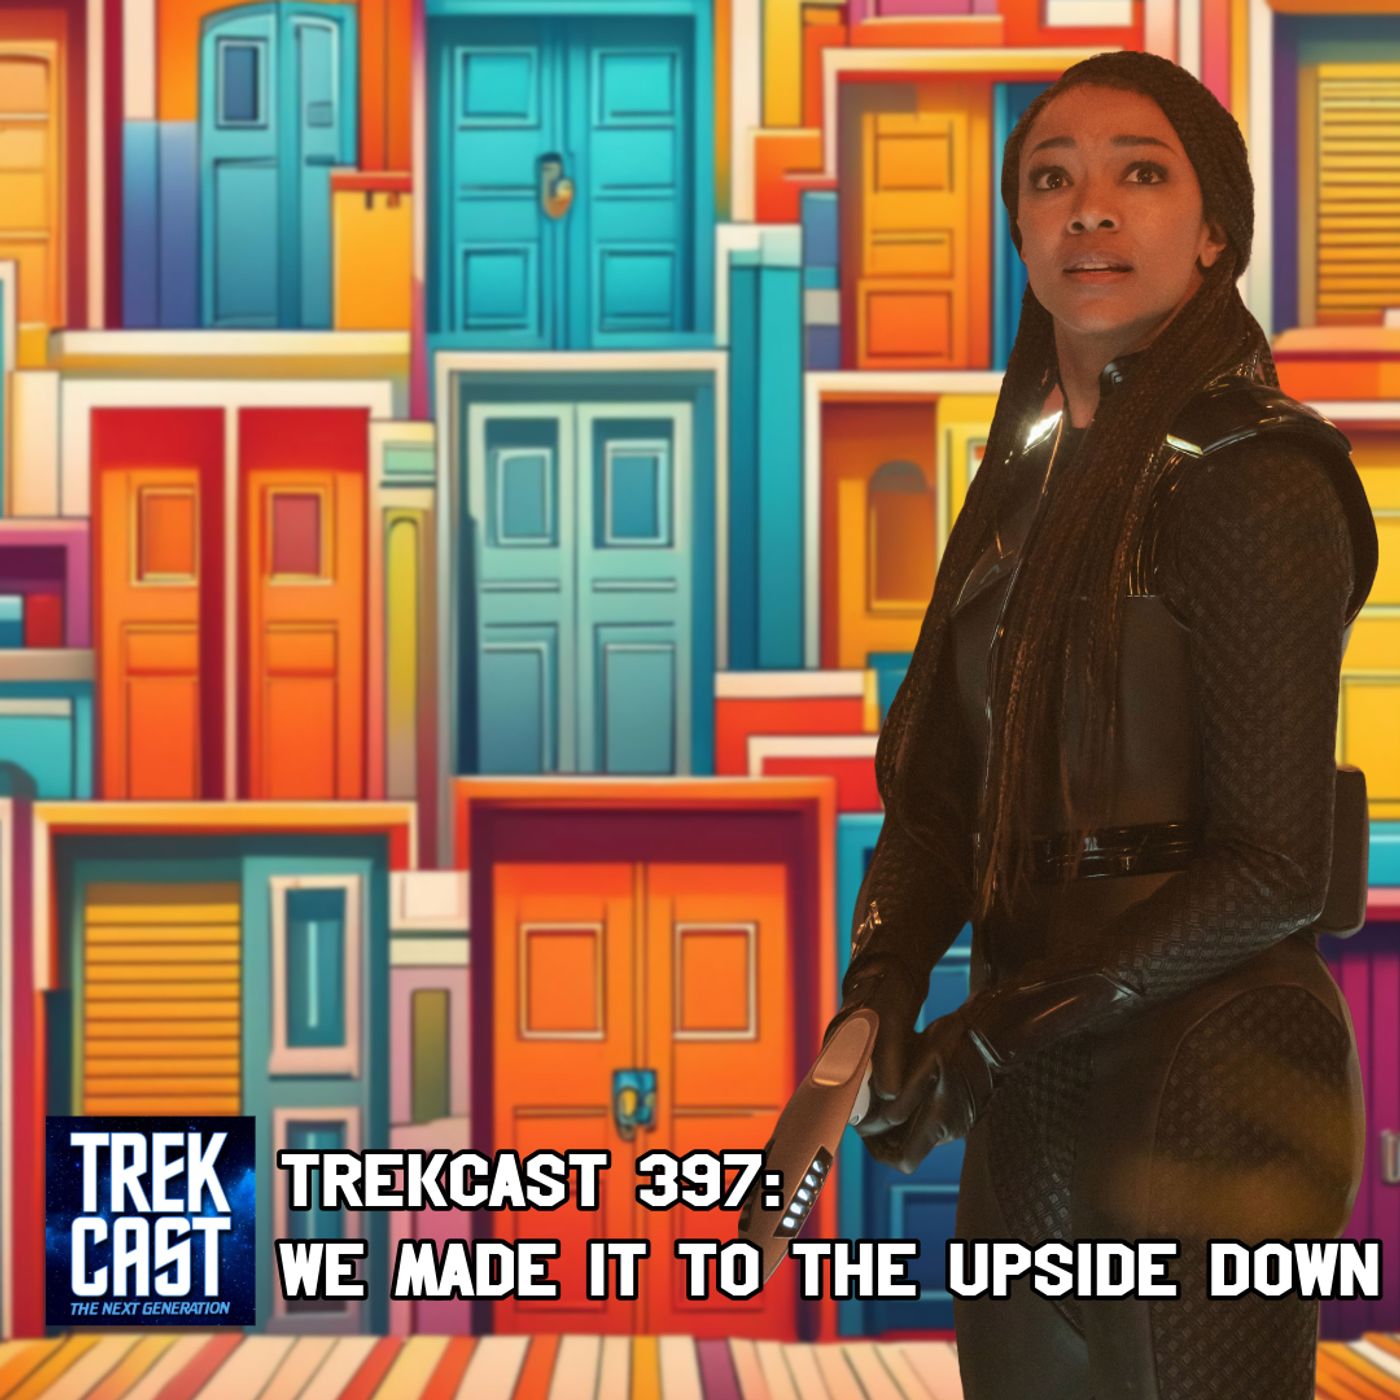 Trekcast 397: We Made It To The Upside Down